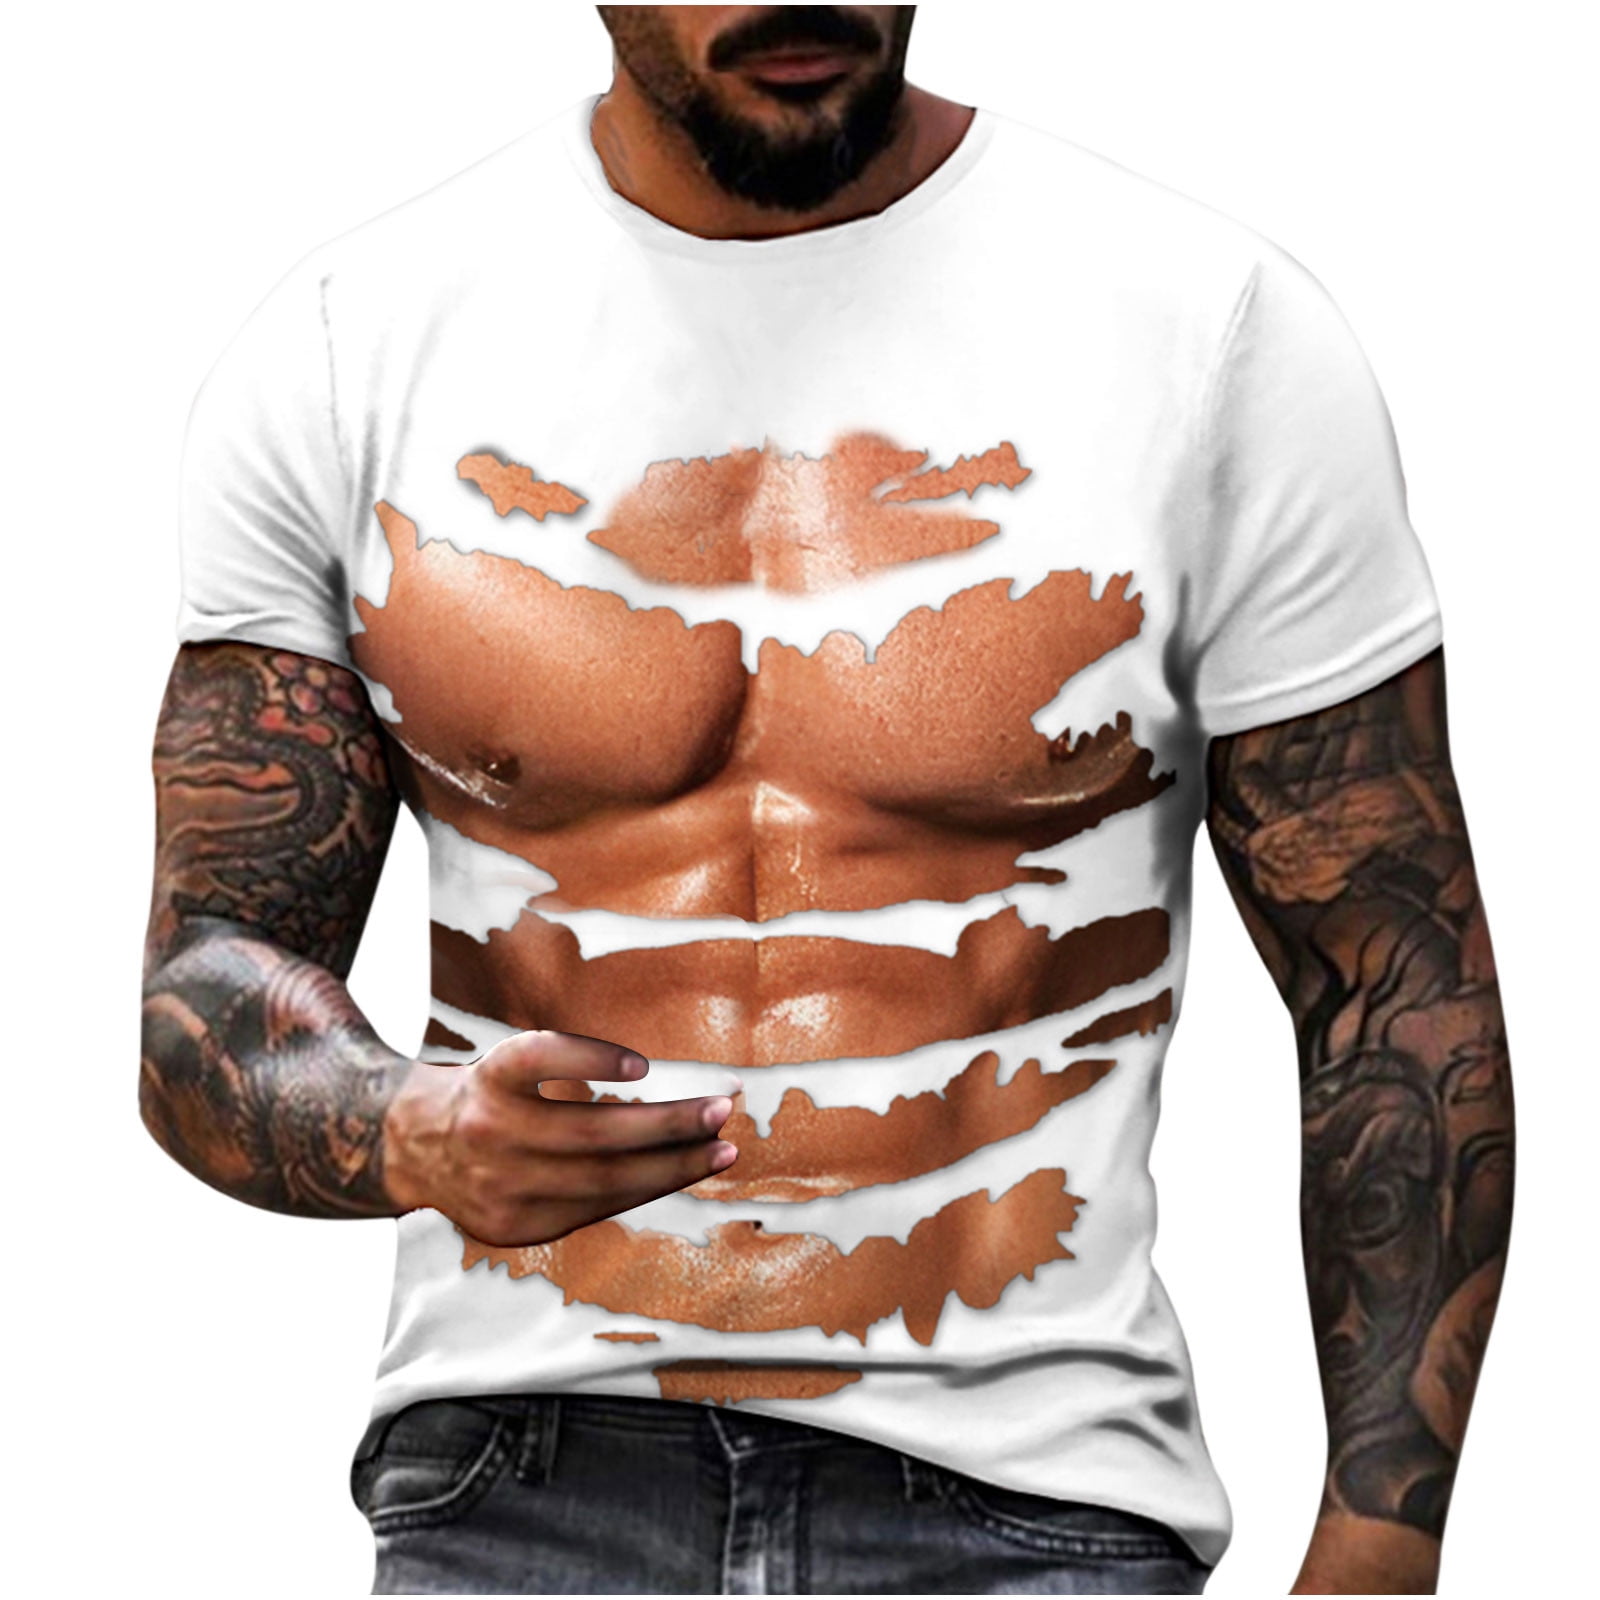 YOMXL Unisex Personalized Creative Novelty 3D Printed T-Shirts Mens Funny Graphic Muscle Tee Necktie Tops 